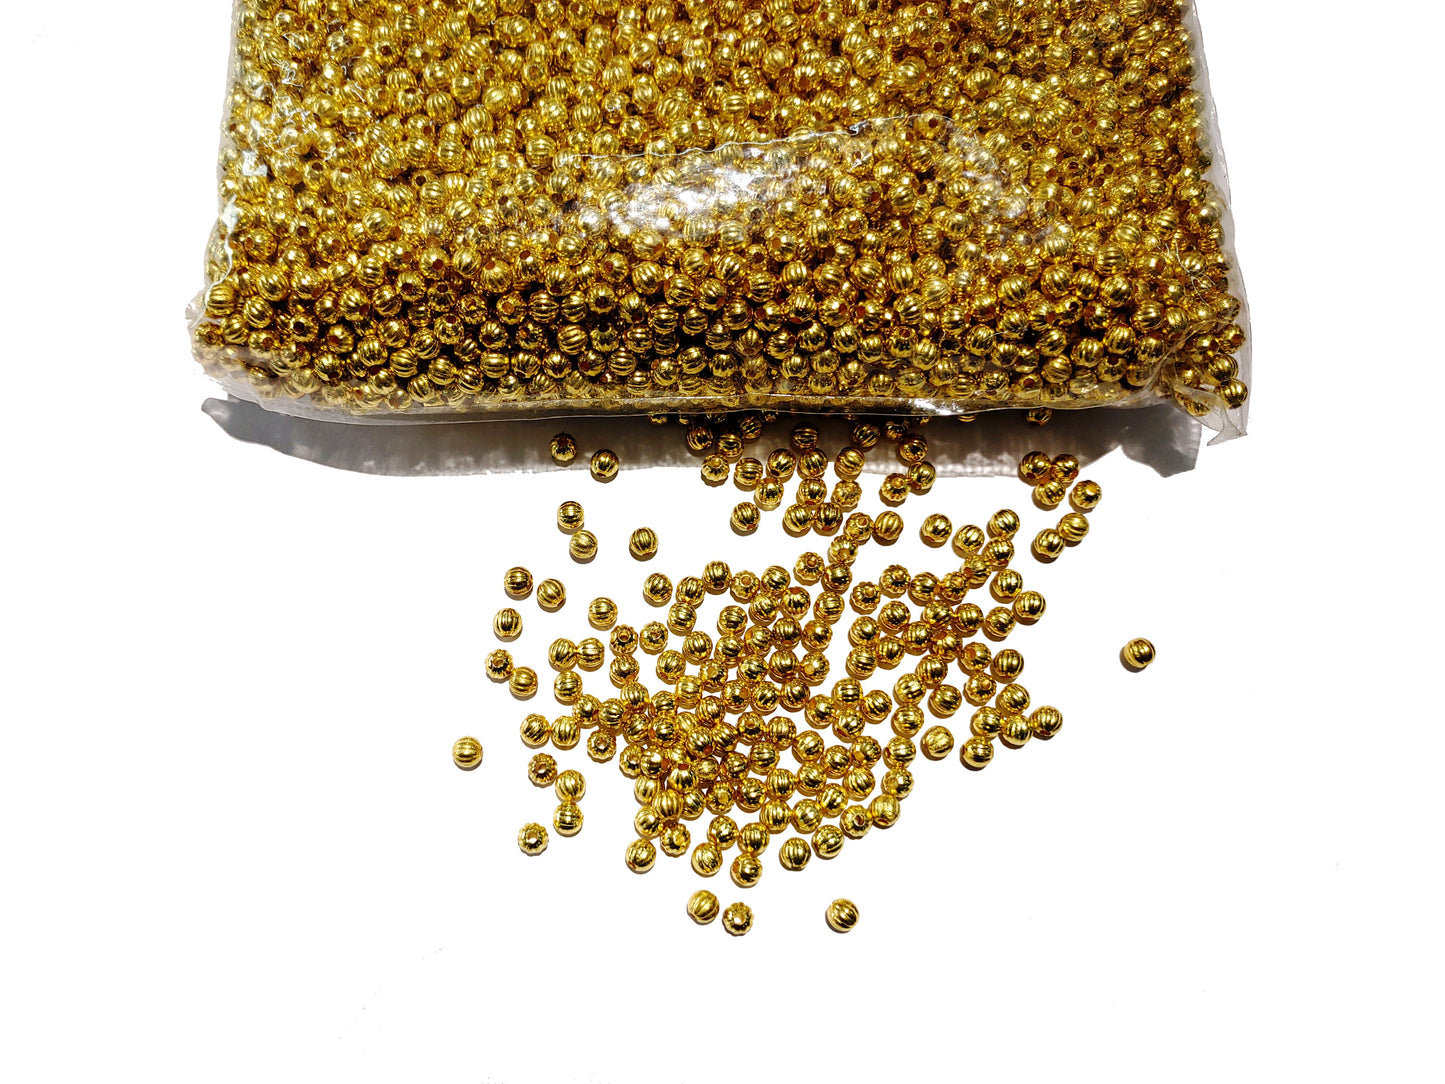 Indian Petals - Melon Shaped 6mm Sewable Golden Kharbuja Beads with Hole on both sides for Craft Decor or Jewelry Making